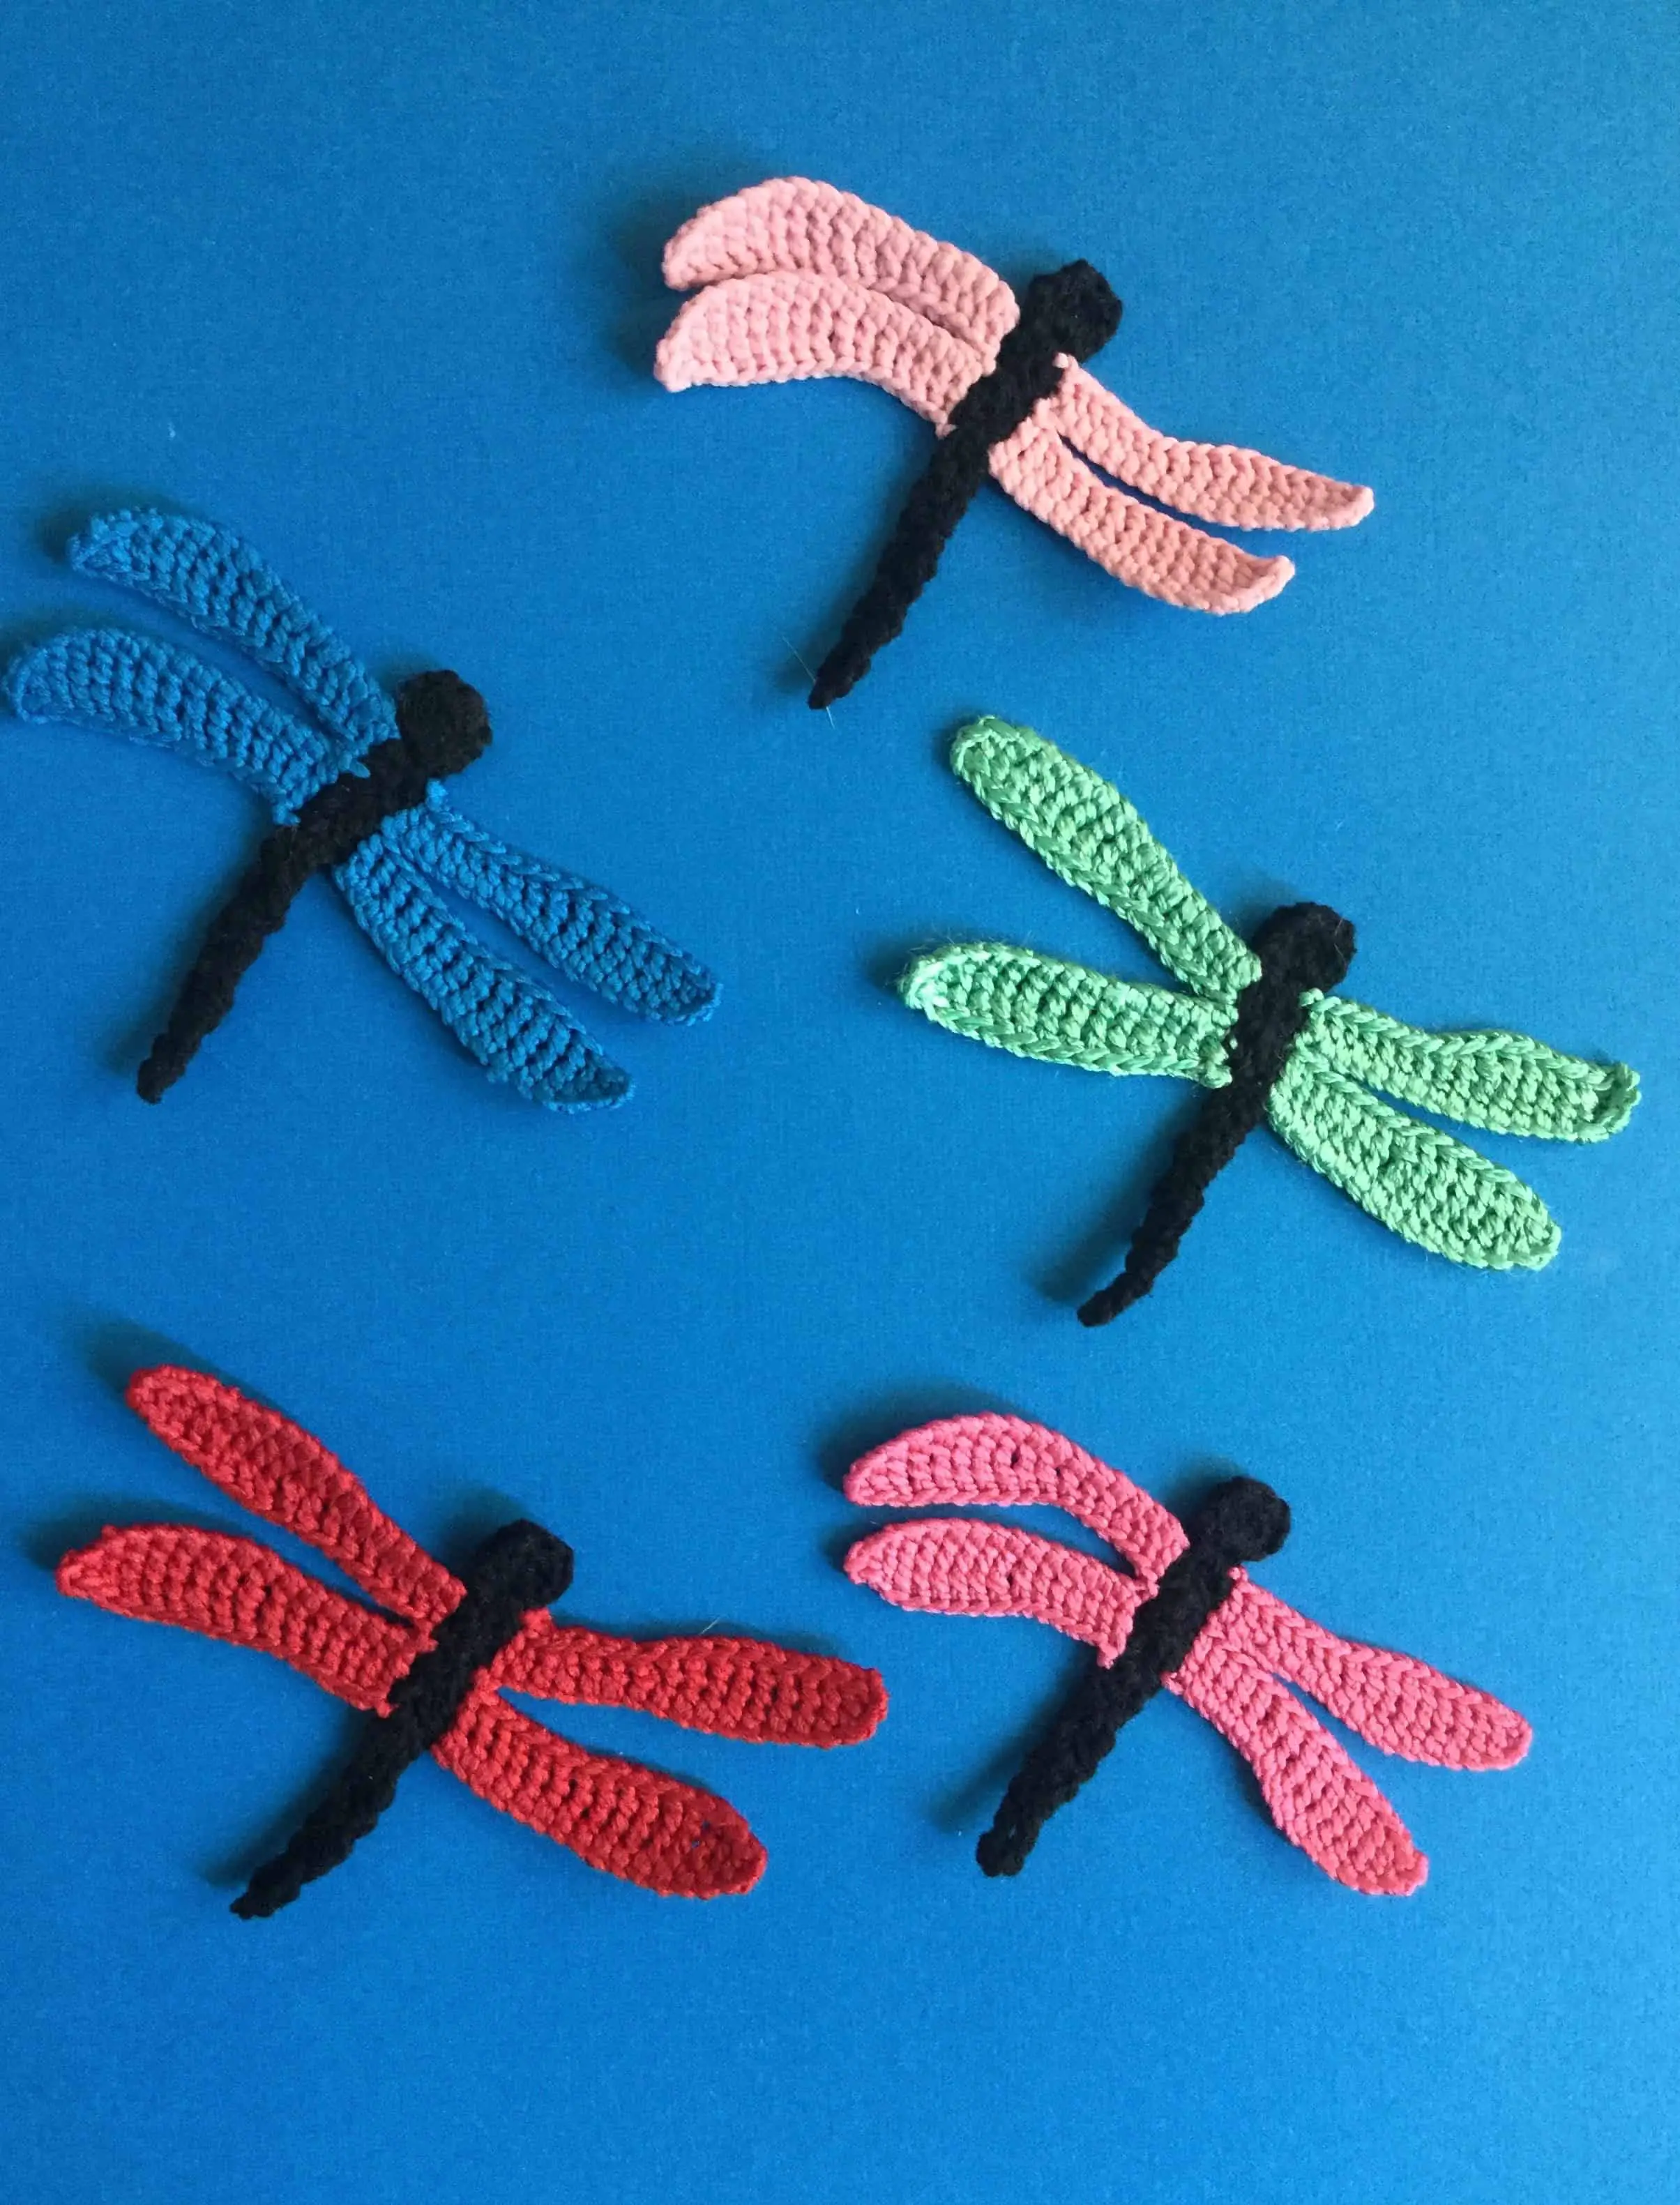 Finished crochet dragonfly group